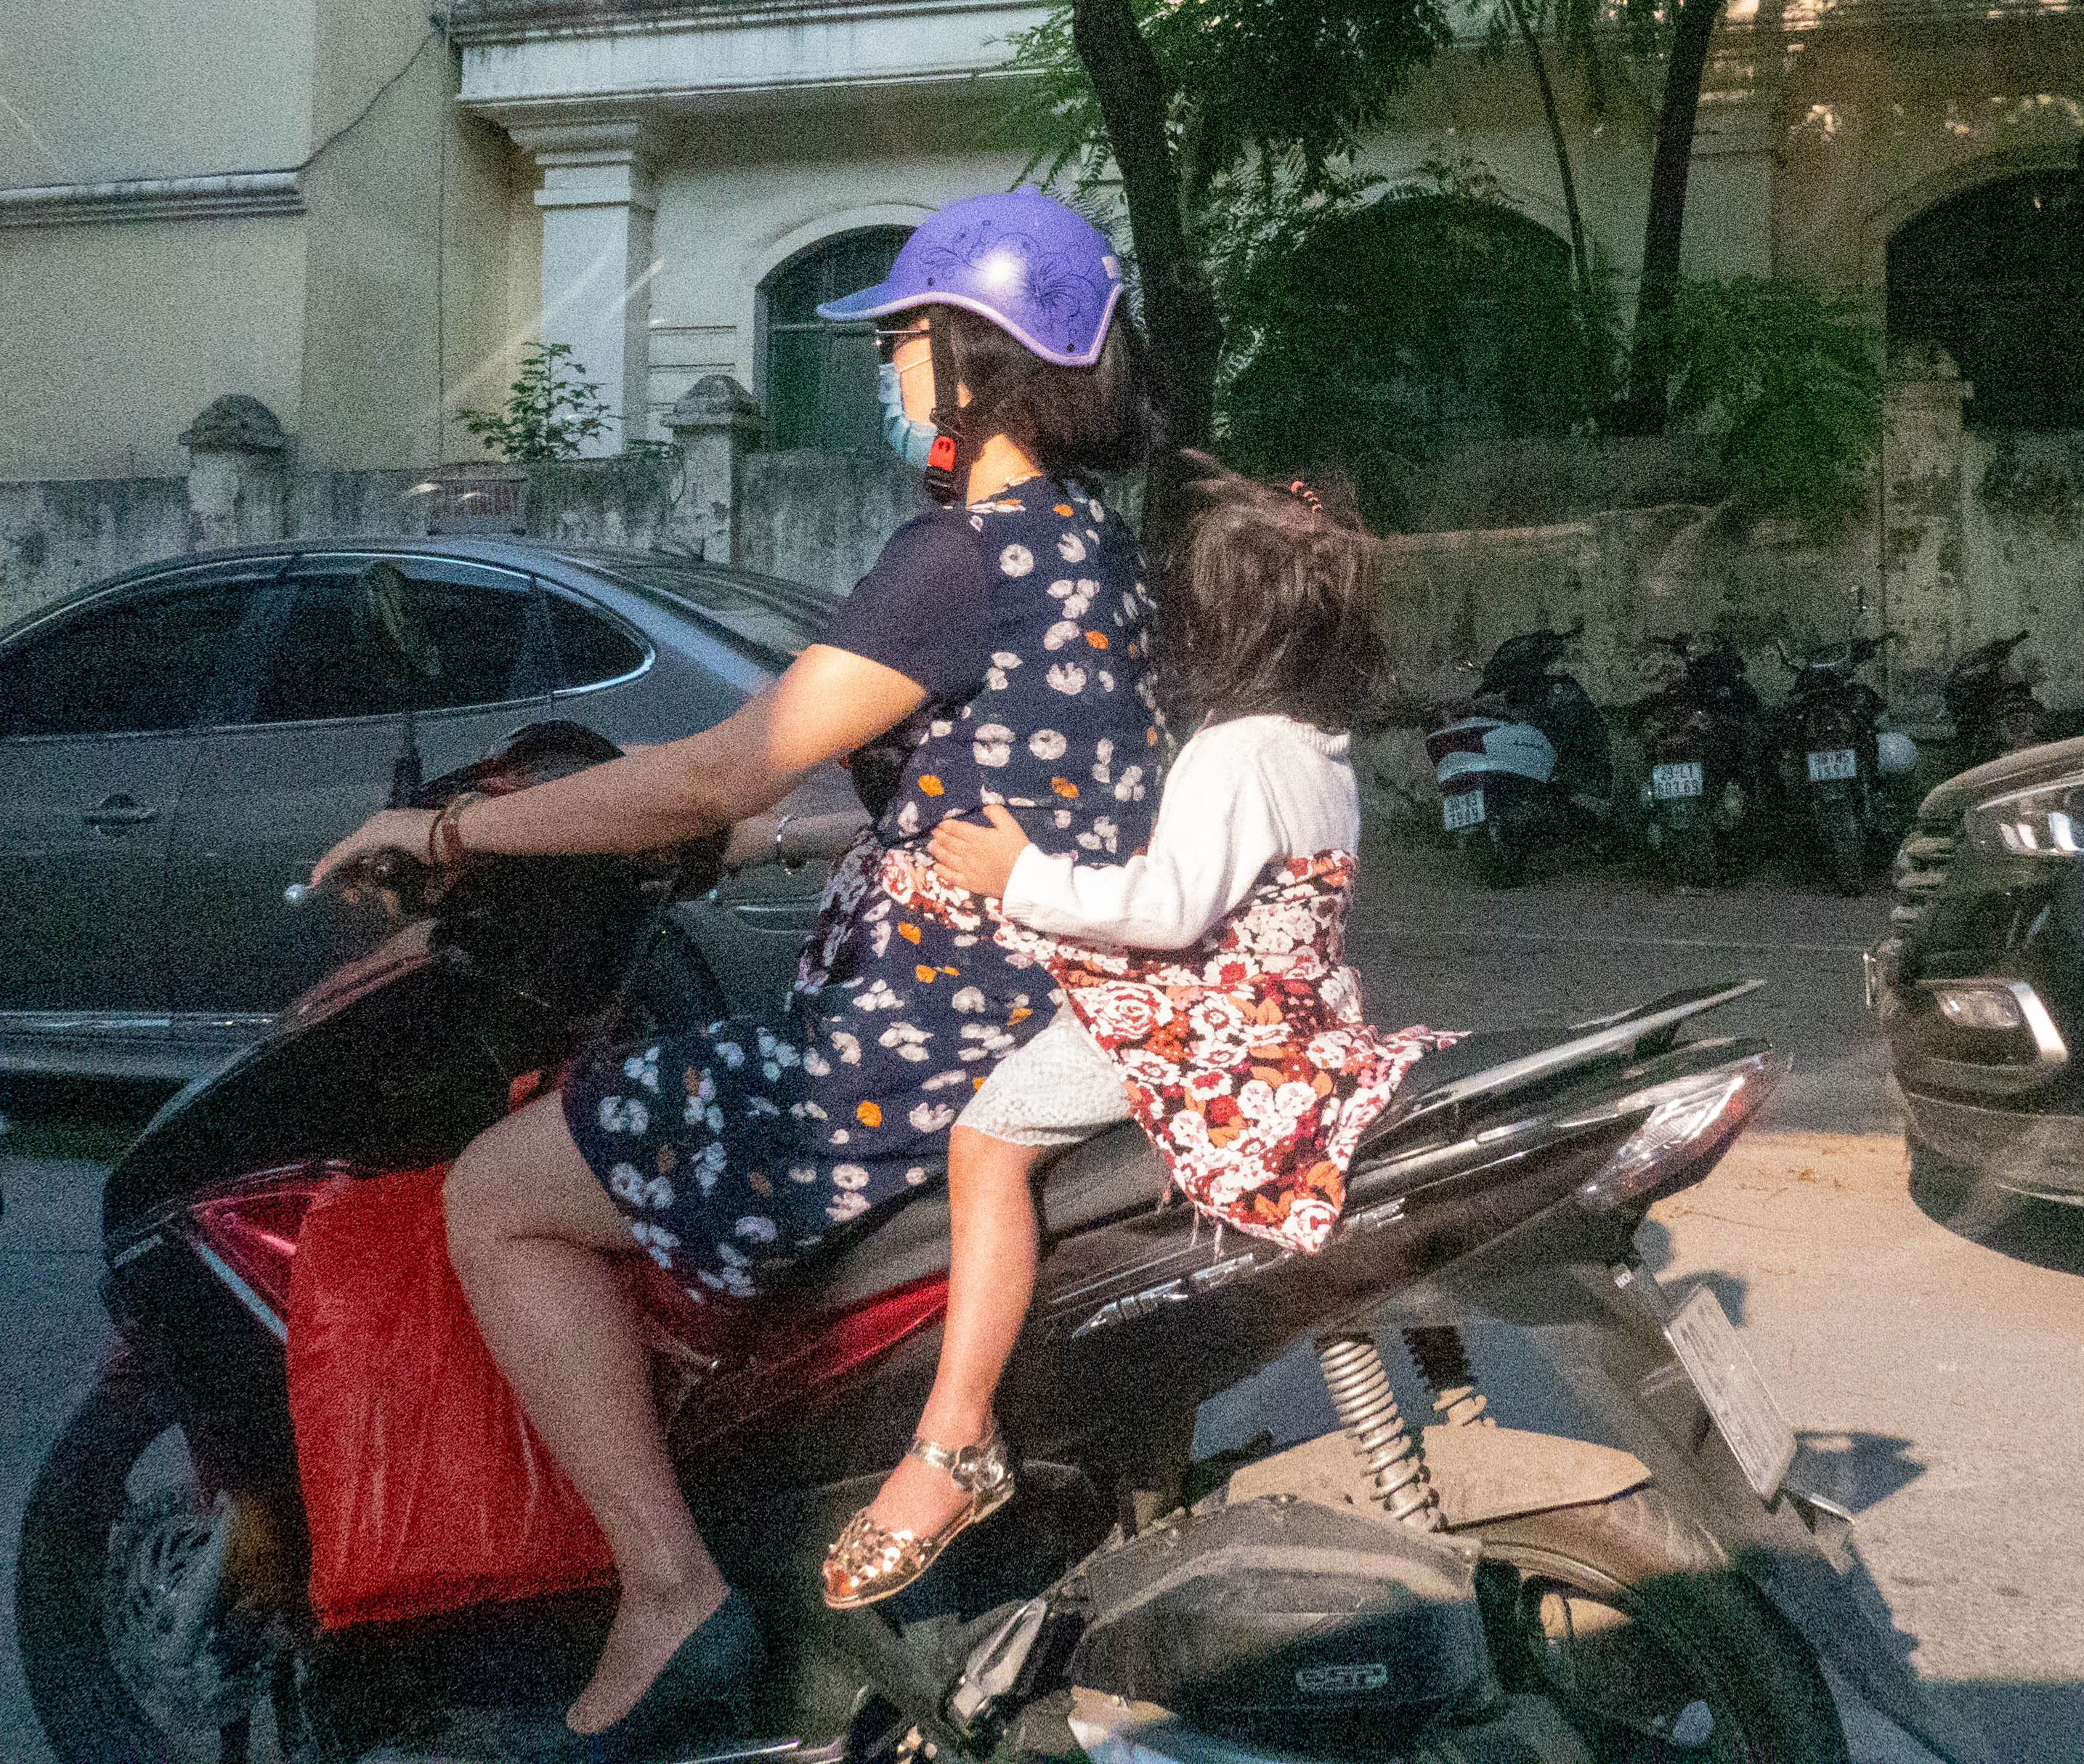 mother and child on motorbike. The toddle behind the mother is holding on to the mom and is tied to the mother with a towel